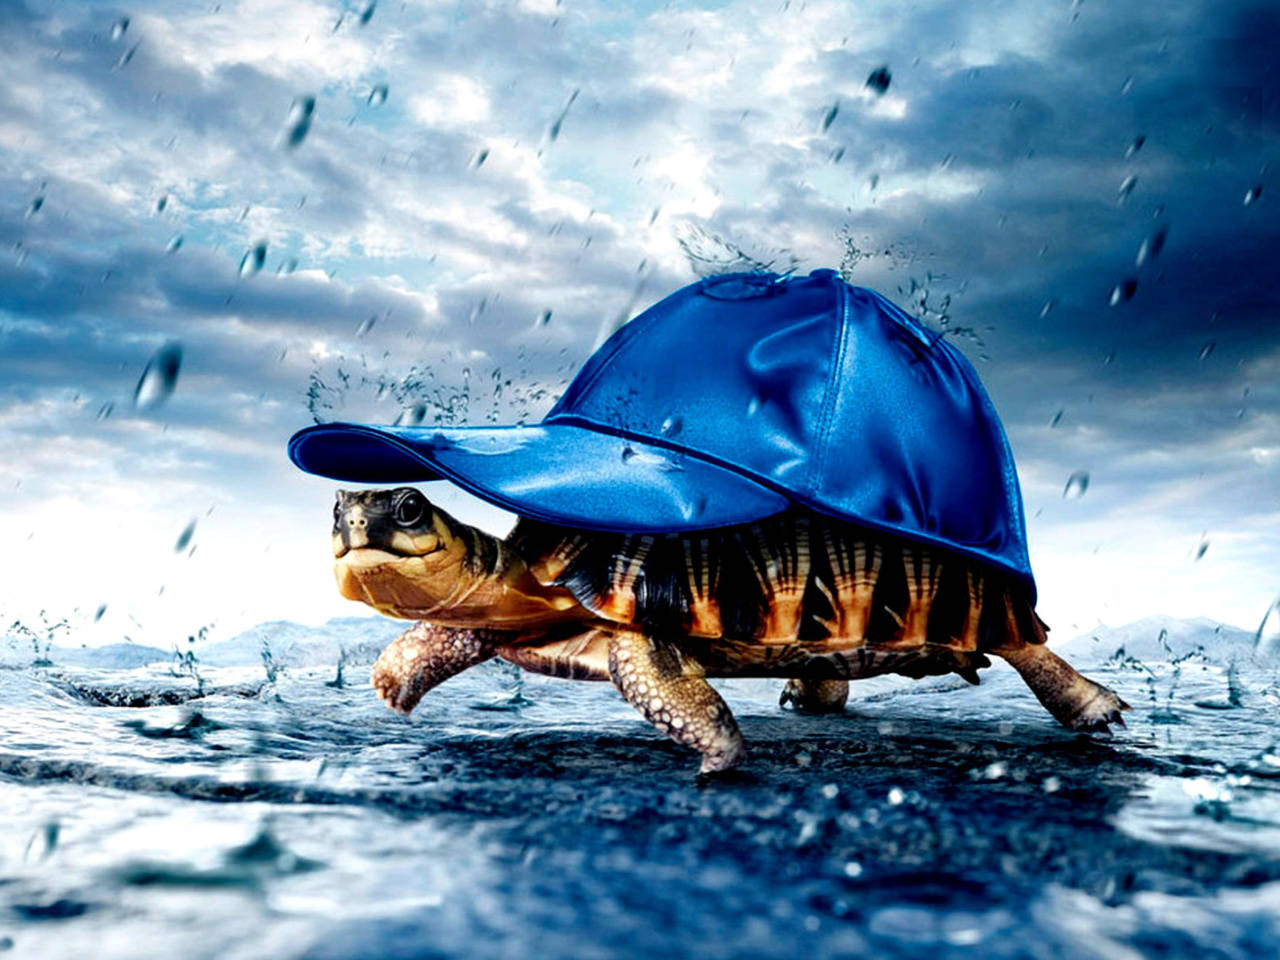 Cute Turtle With Blue Baseball Cap Background